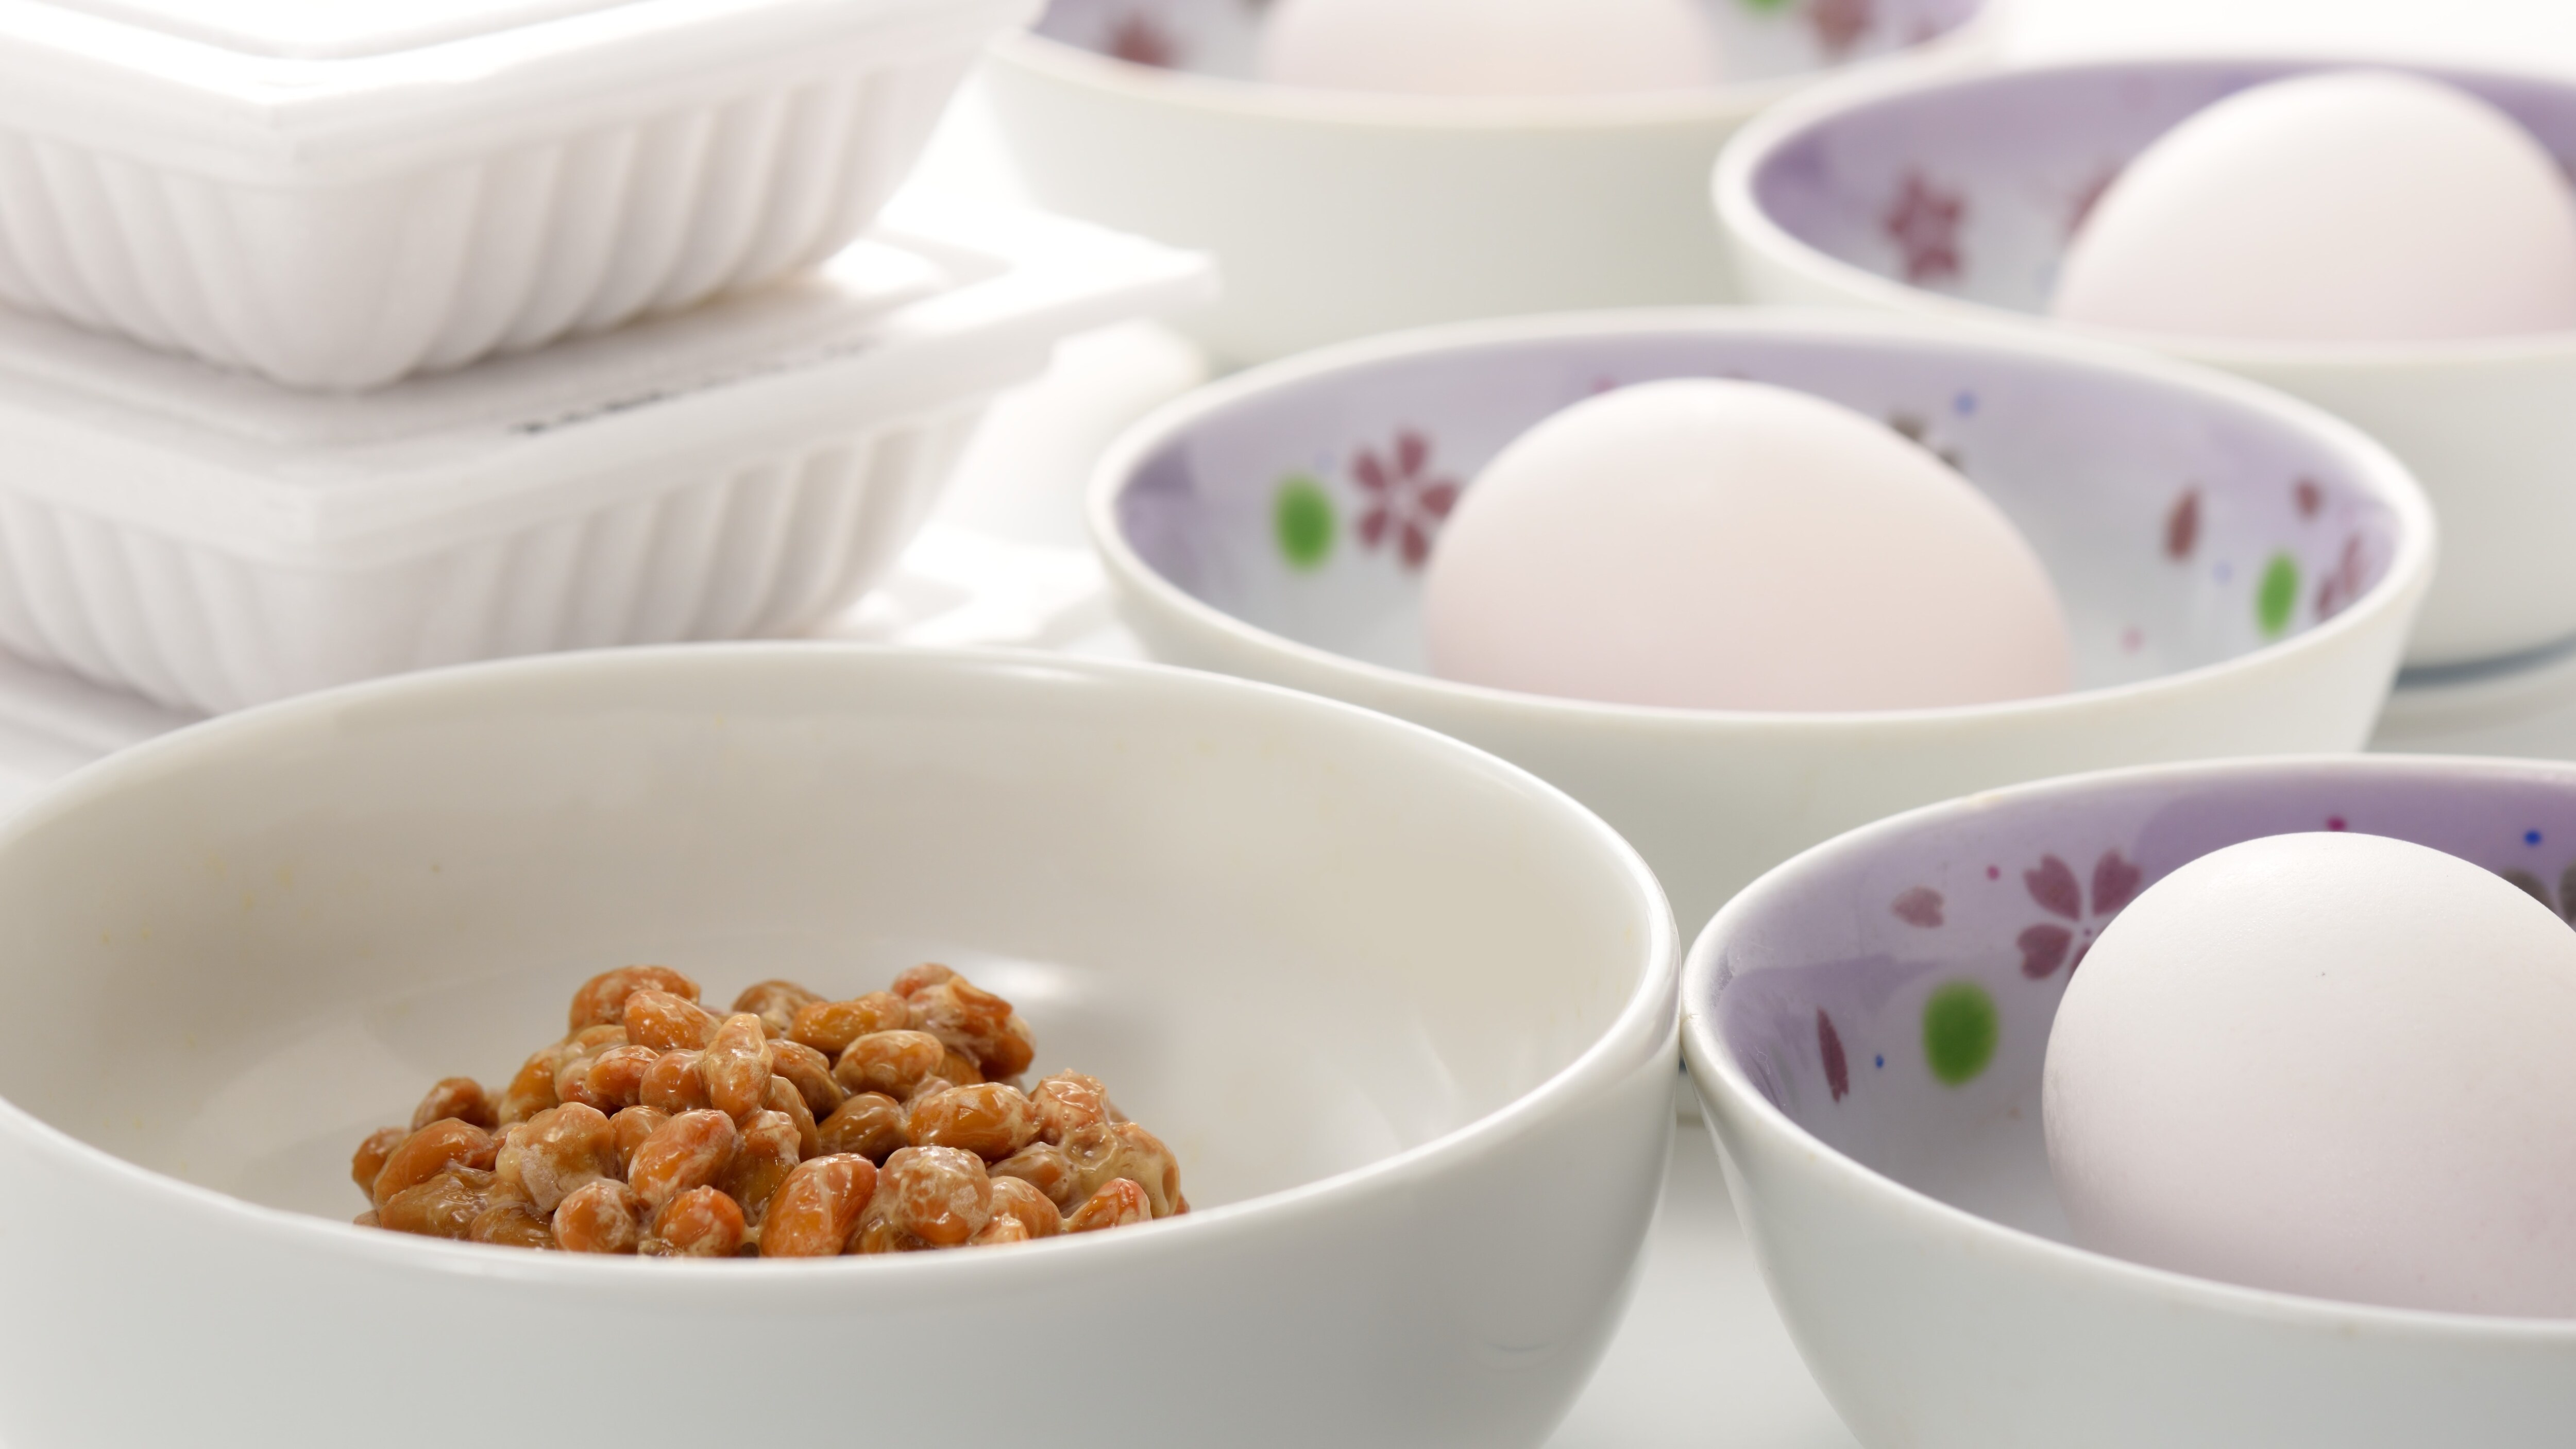 Natto and eggs are provided free of charge at breakfast.